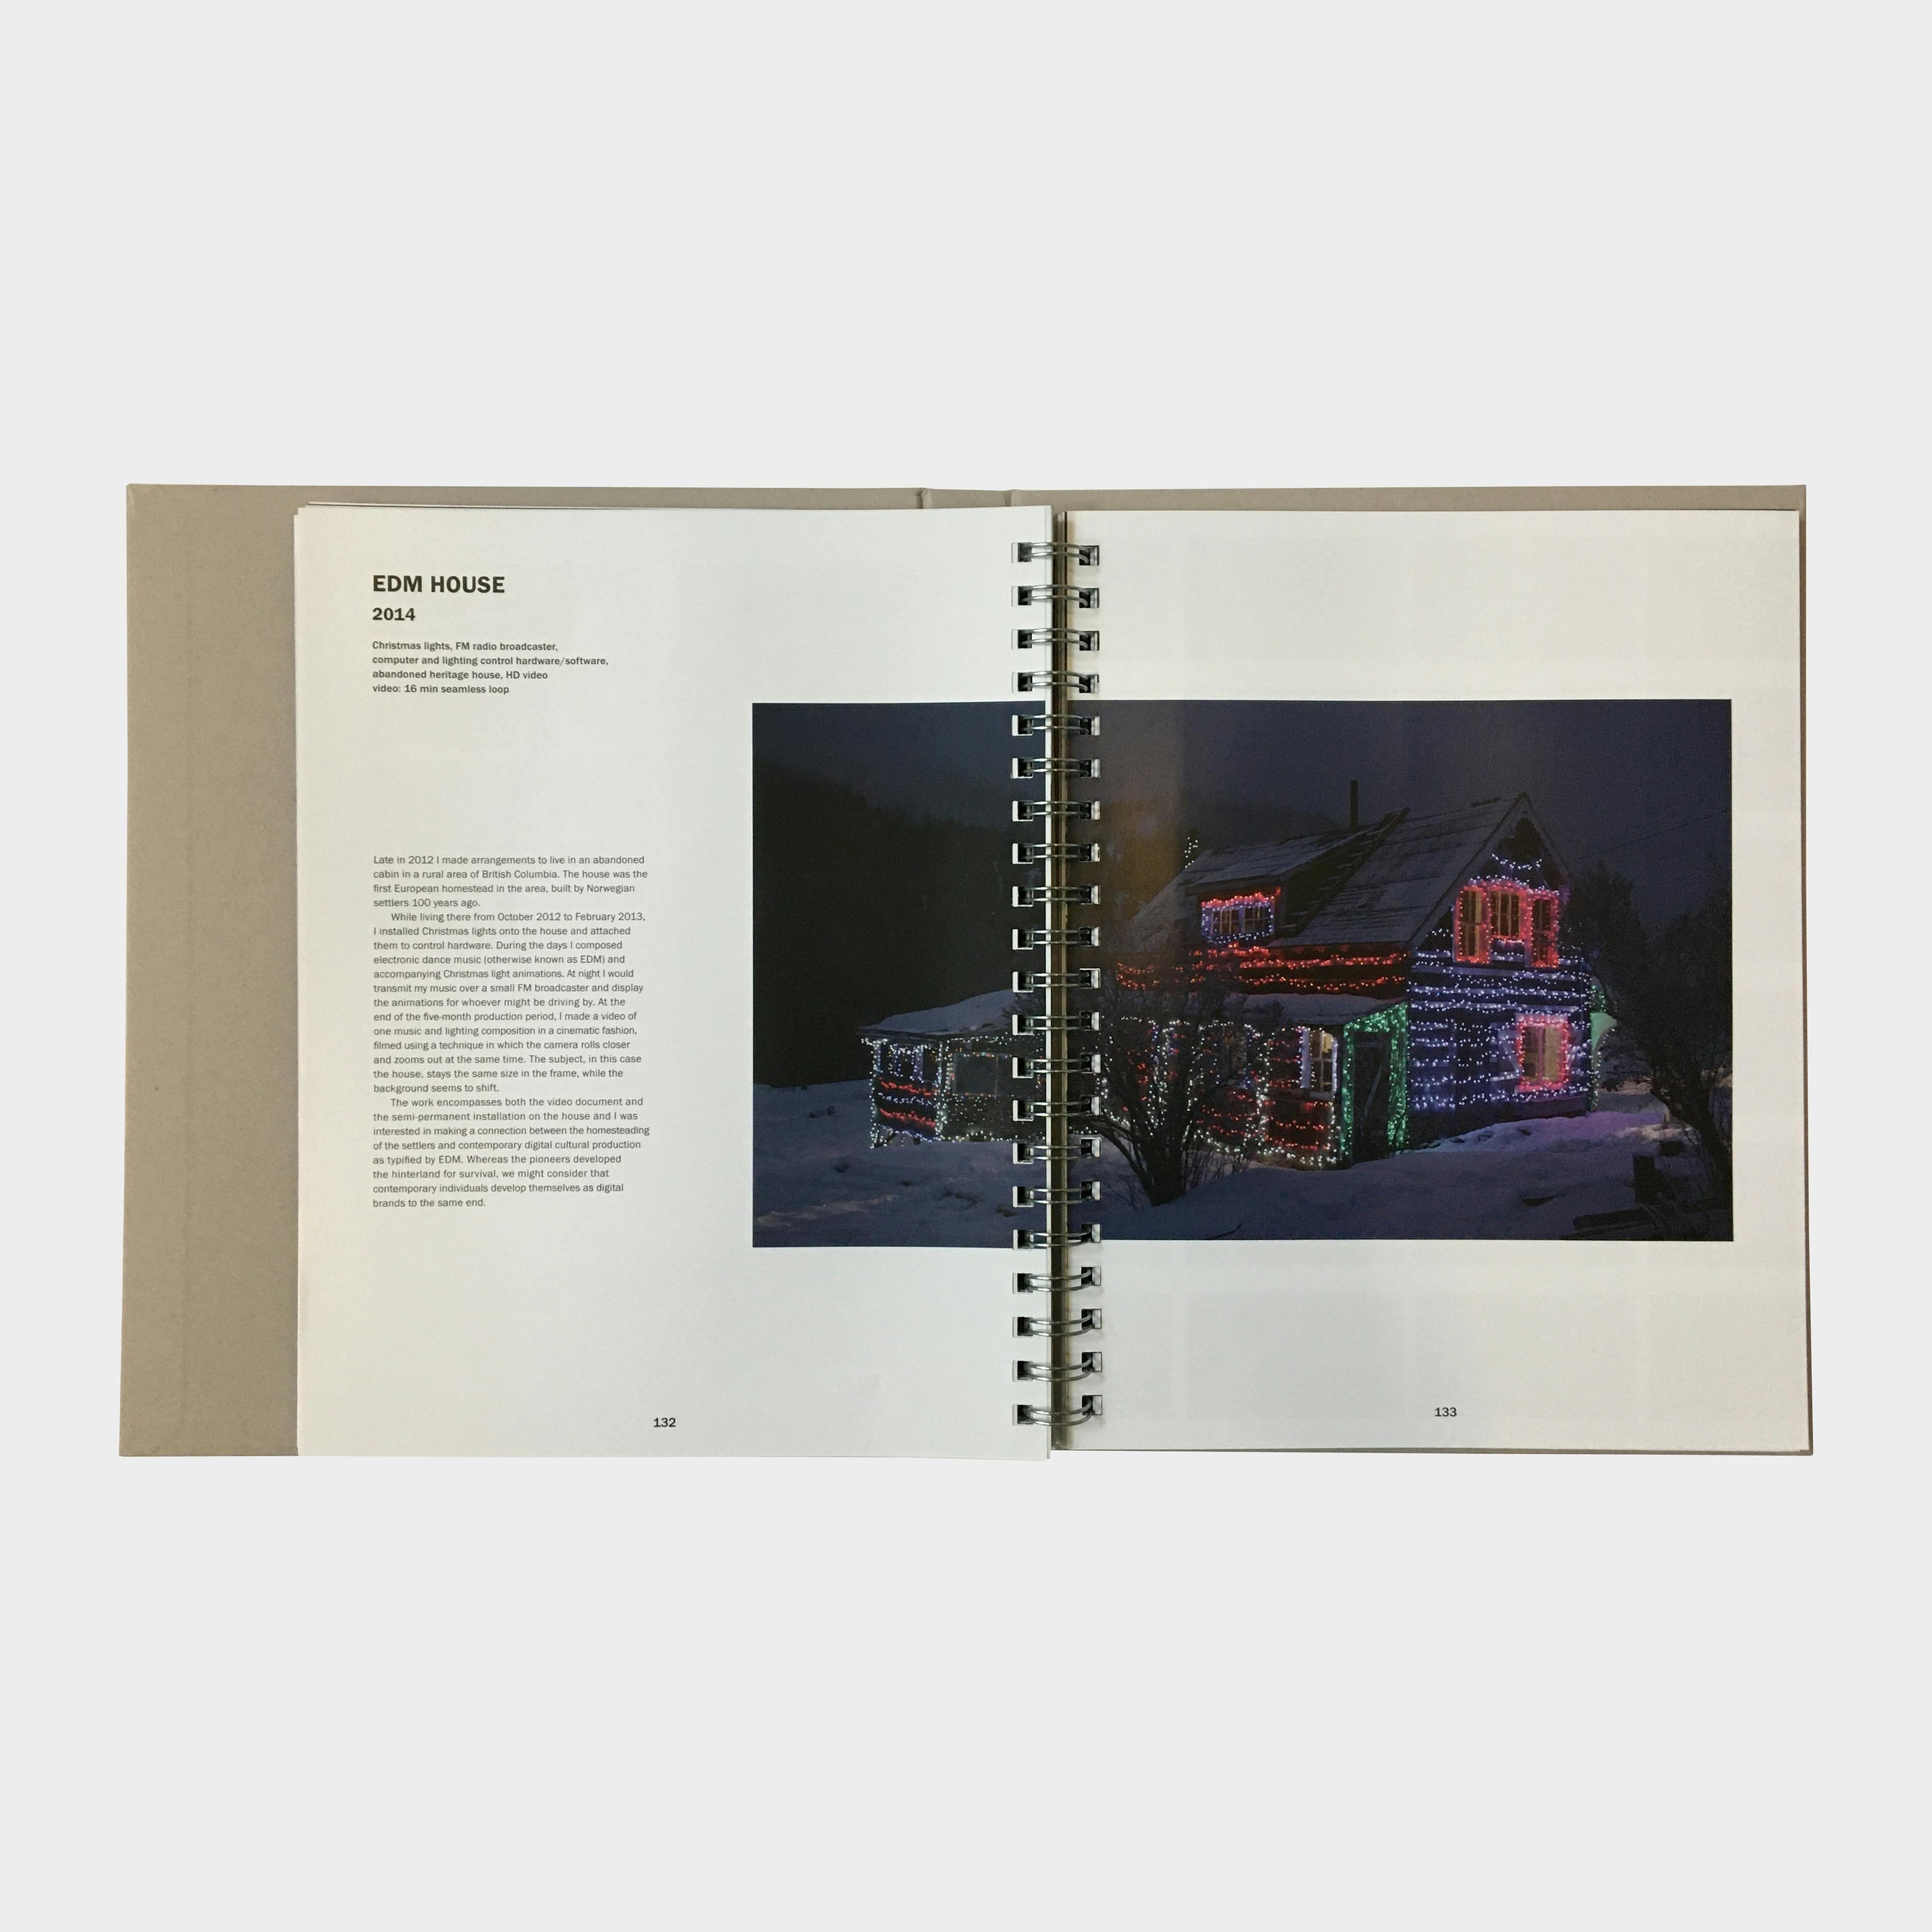 An image of an open page in Kevin Schmidt's monograph. The photograph printed on the page records the house decorated with holiday lights at night. 